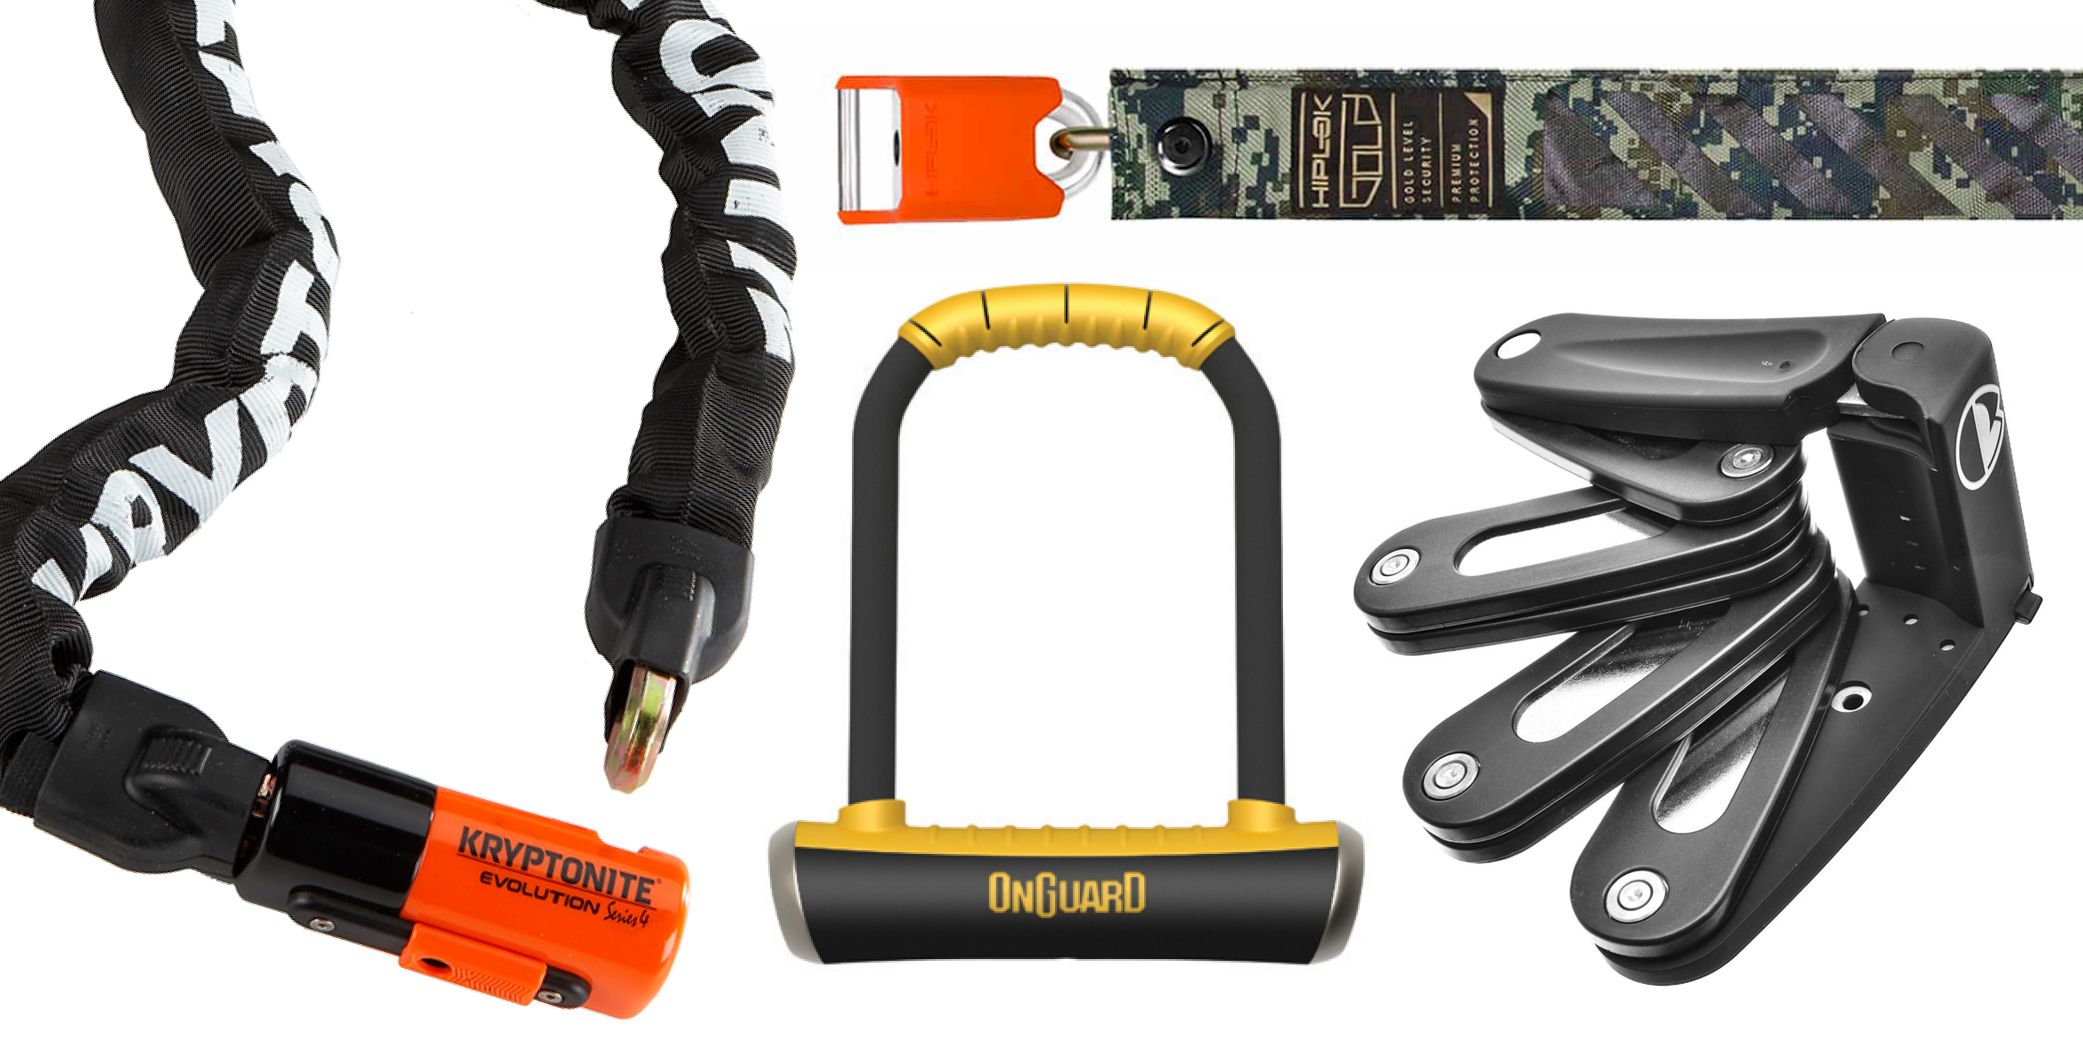 110cm PENTAGON Bike Chain Key Lock Maximum Security Master Tool Bike Protector Magnetic Patented Gold Secure Heavy Duty Anti Theft Lock for Bicycles E-Bikes Scooters and Motorcycles